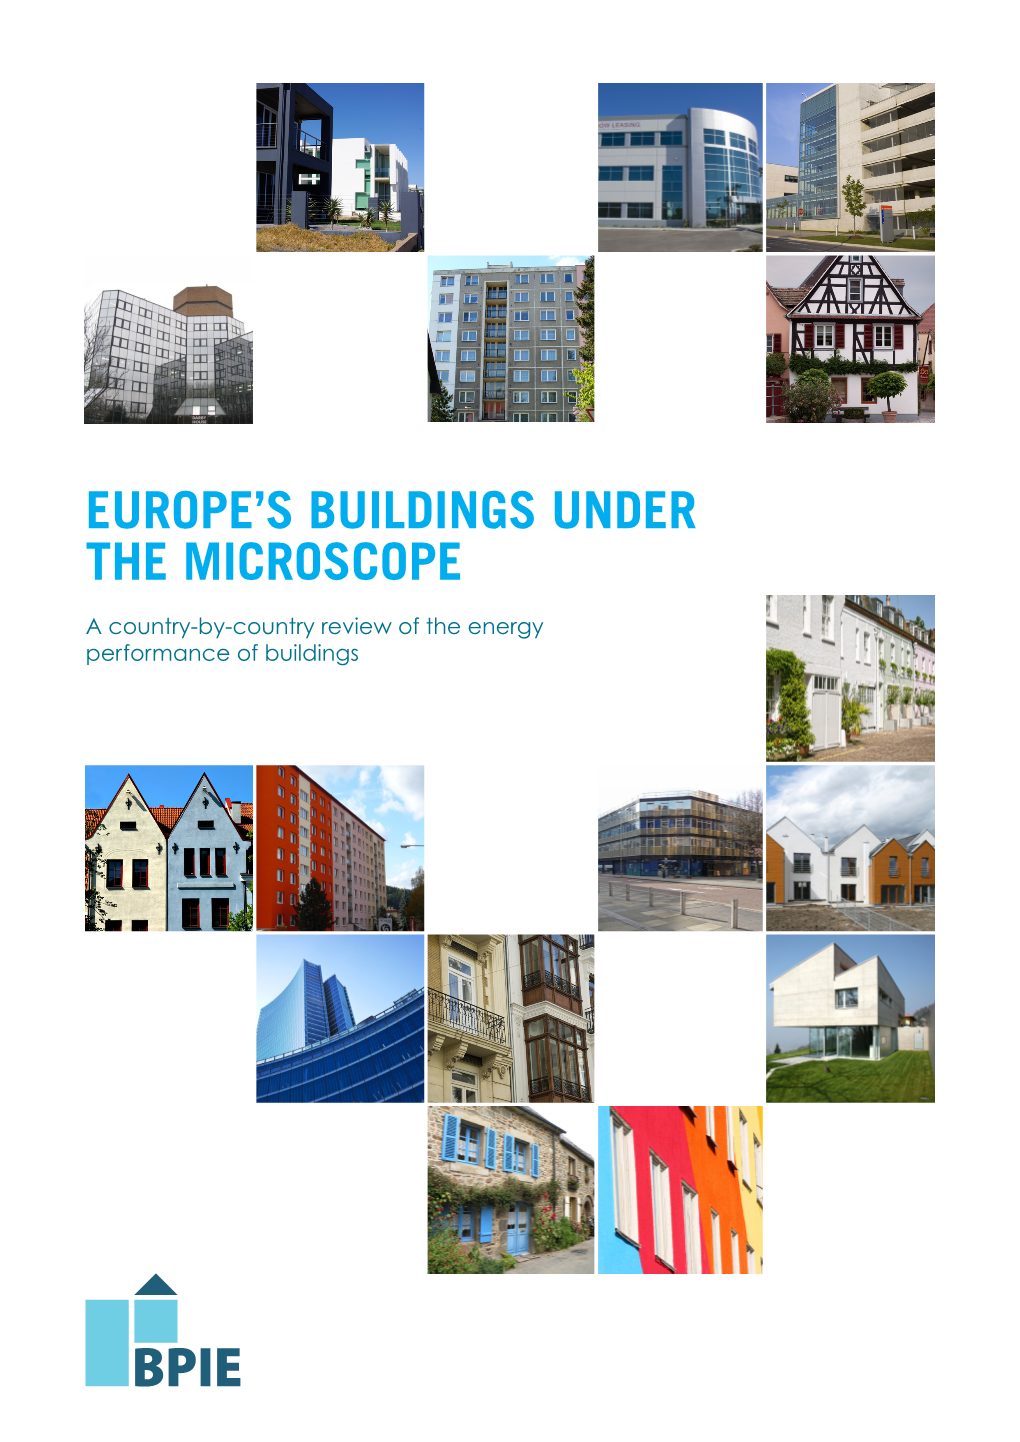 Europe's Buildings Under the Microscope